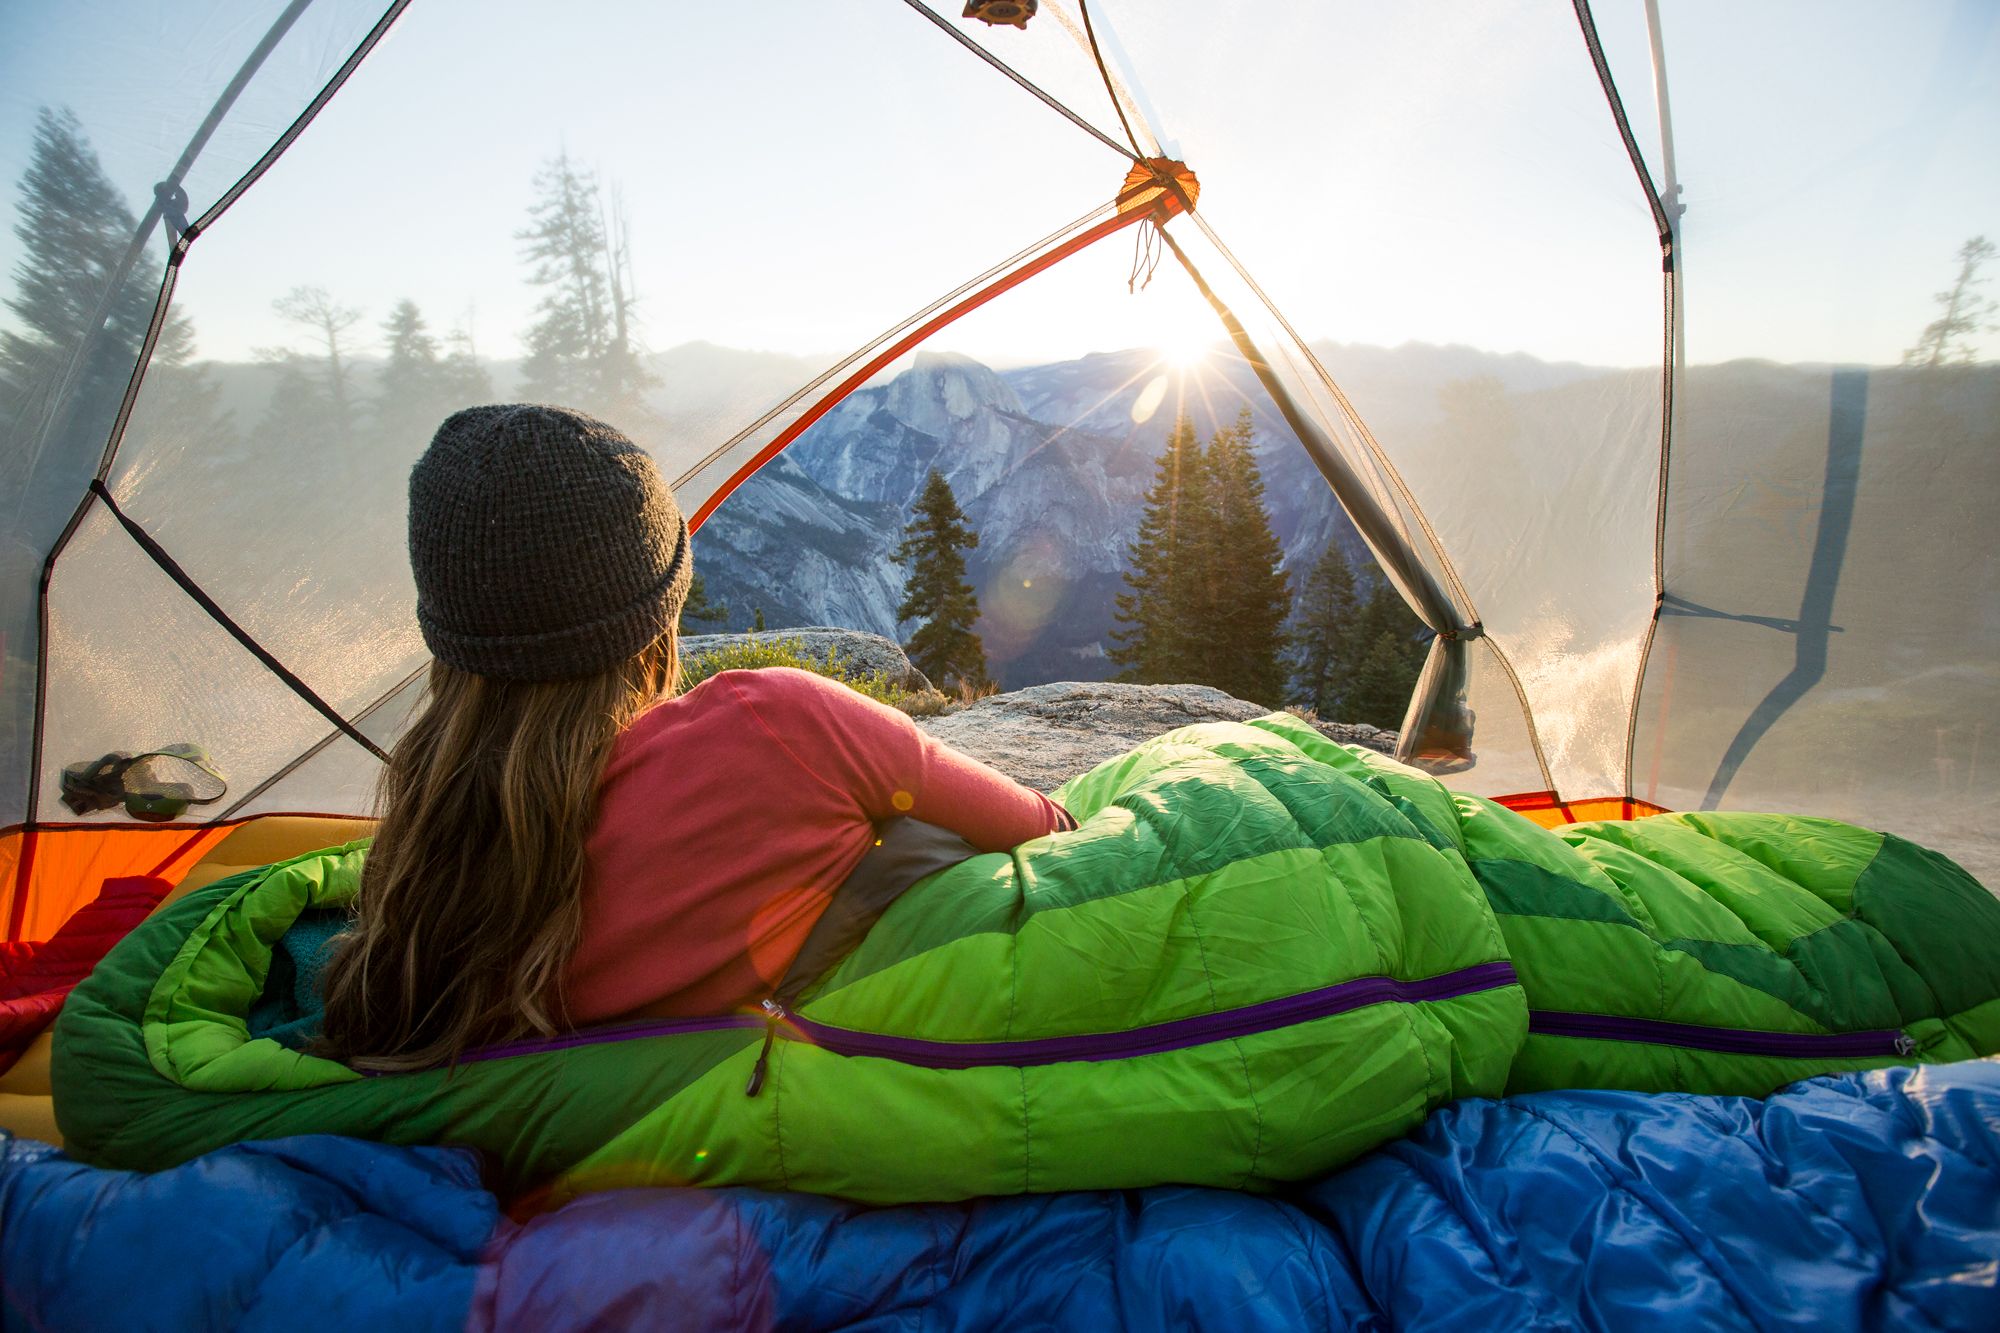 How to Fix Clean  Store Your Tents and Sleeping Bags This Summer